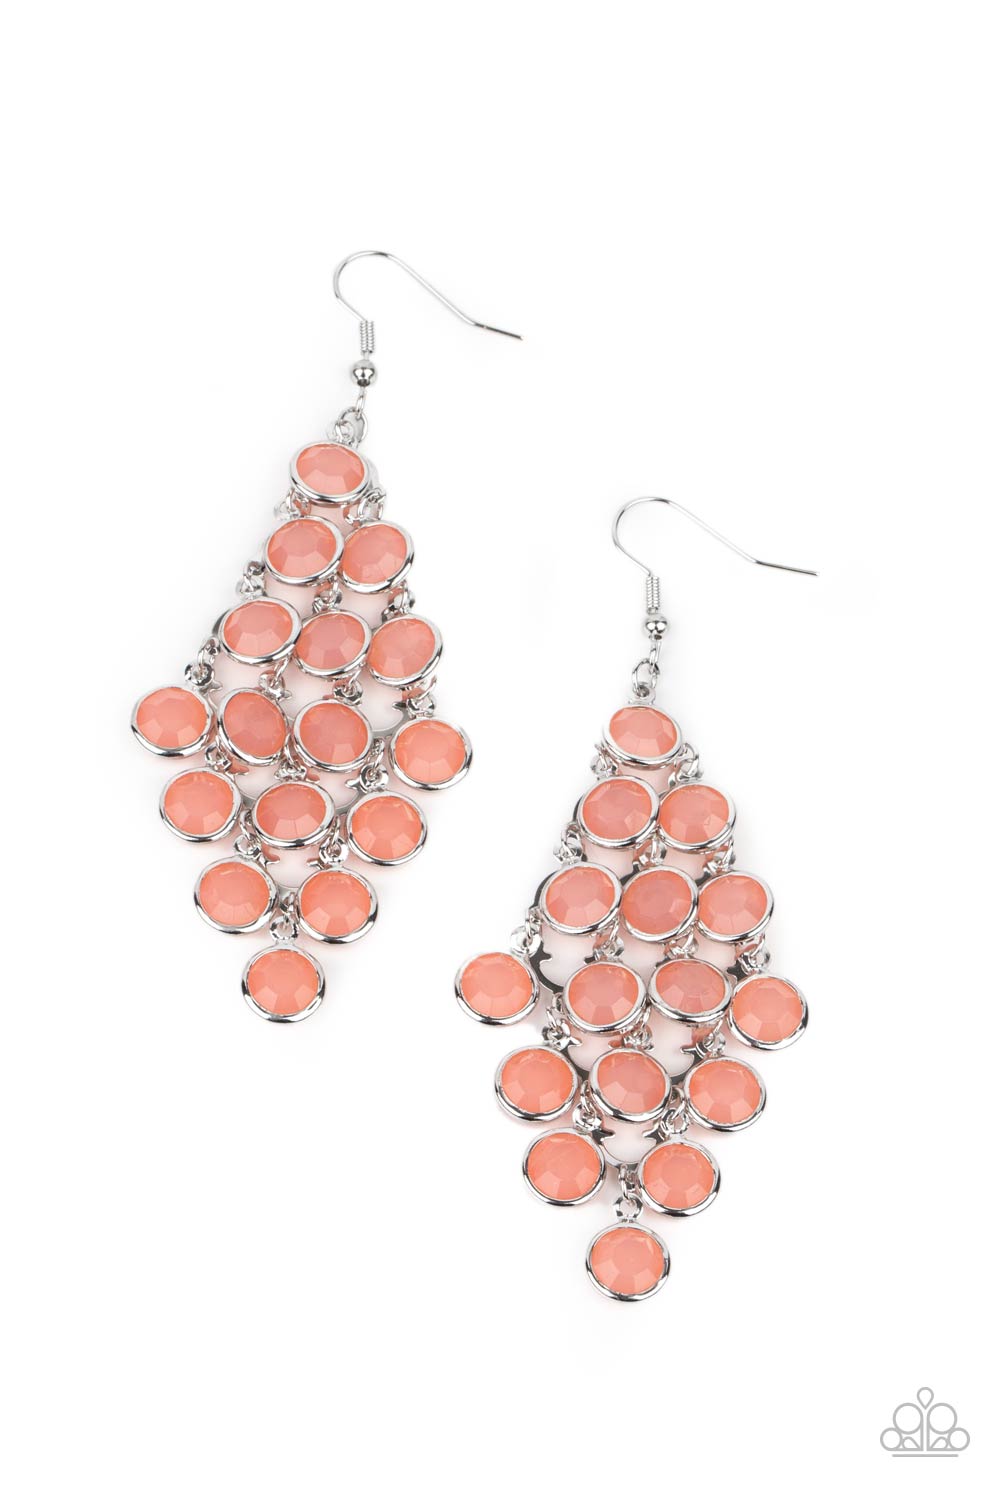 With All DEW Respect - Orange Earrings - Princess Glam Shop